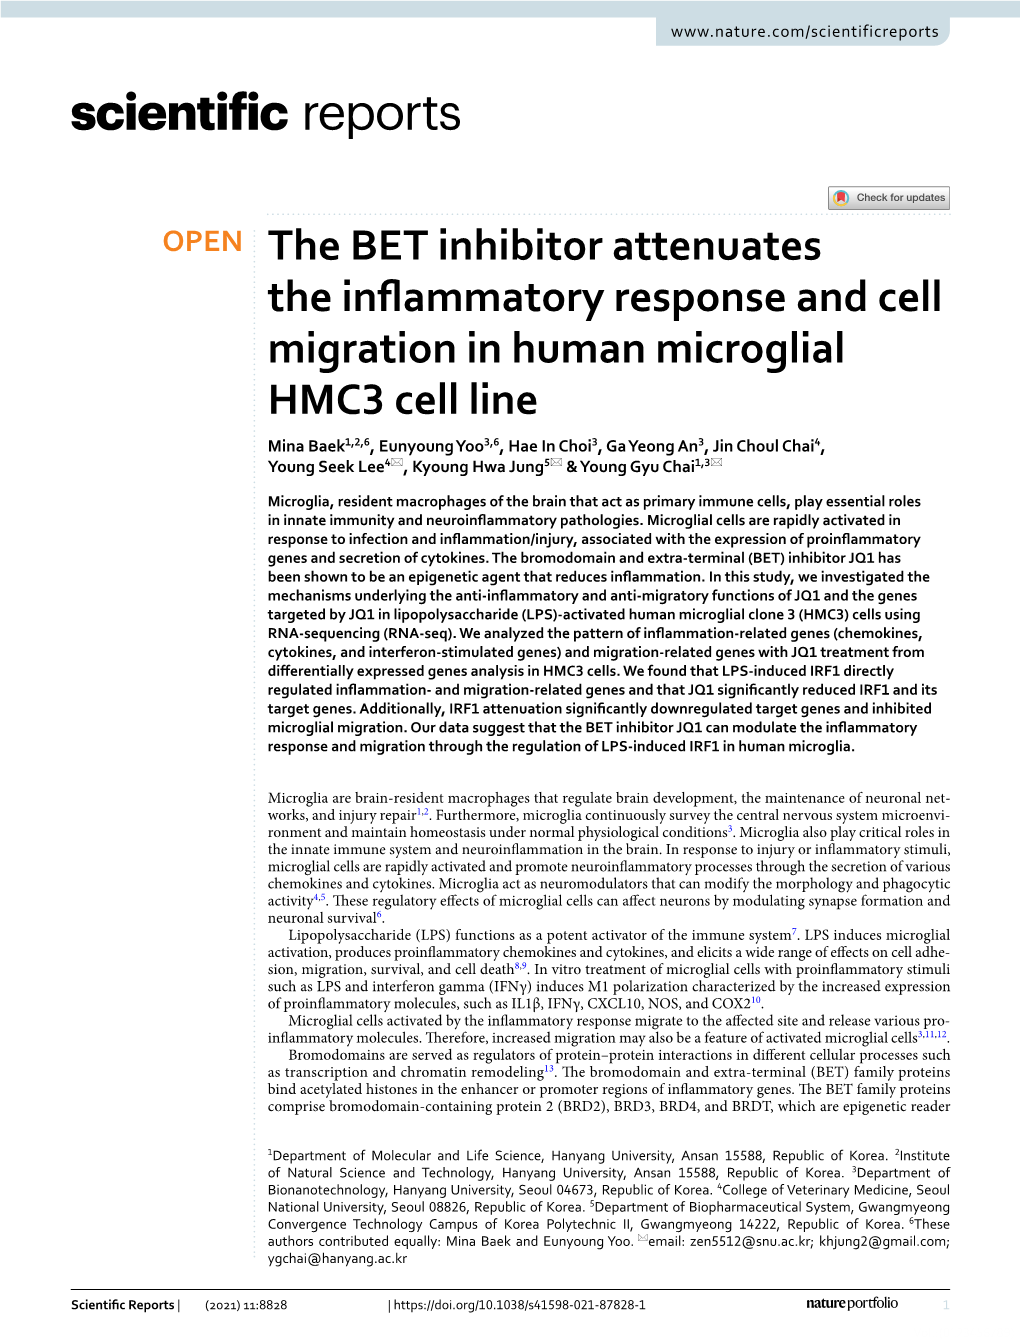 The BET Inhibitor Attenuates the Inflammatory Response and Cell